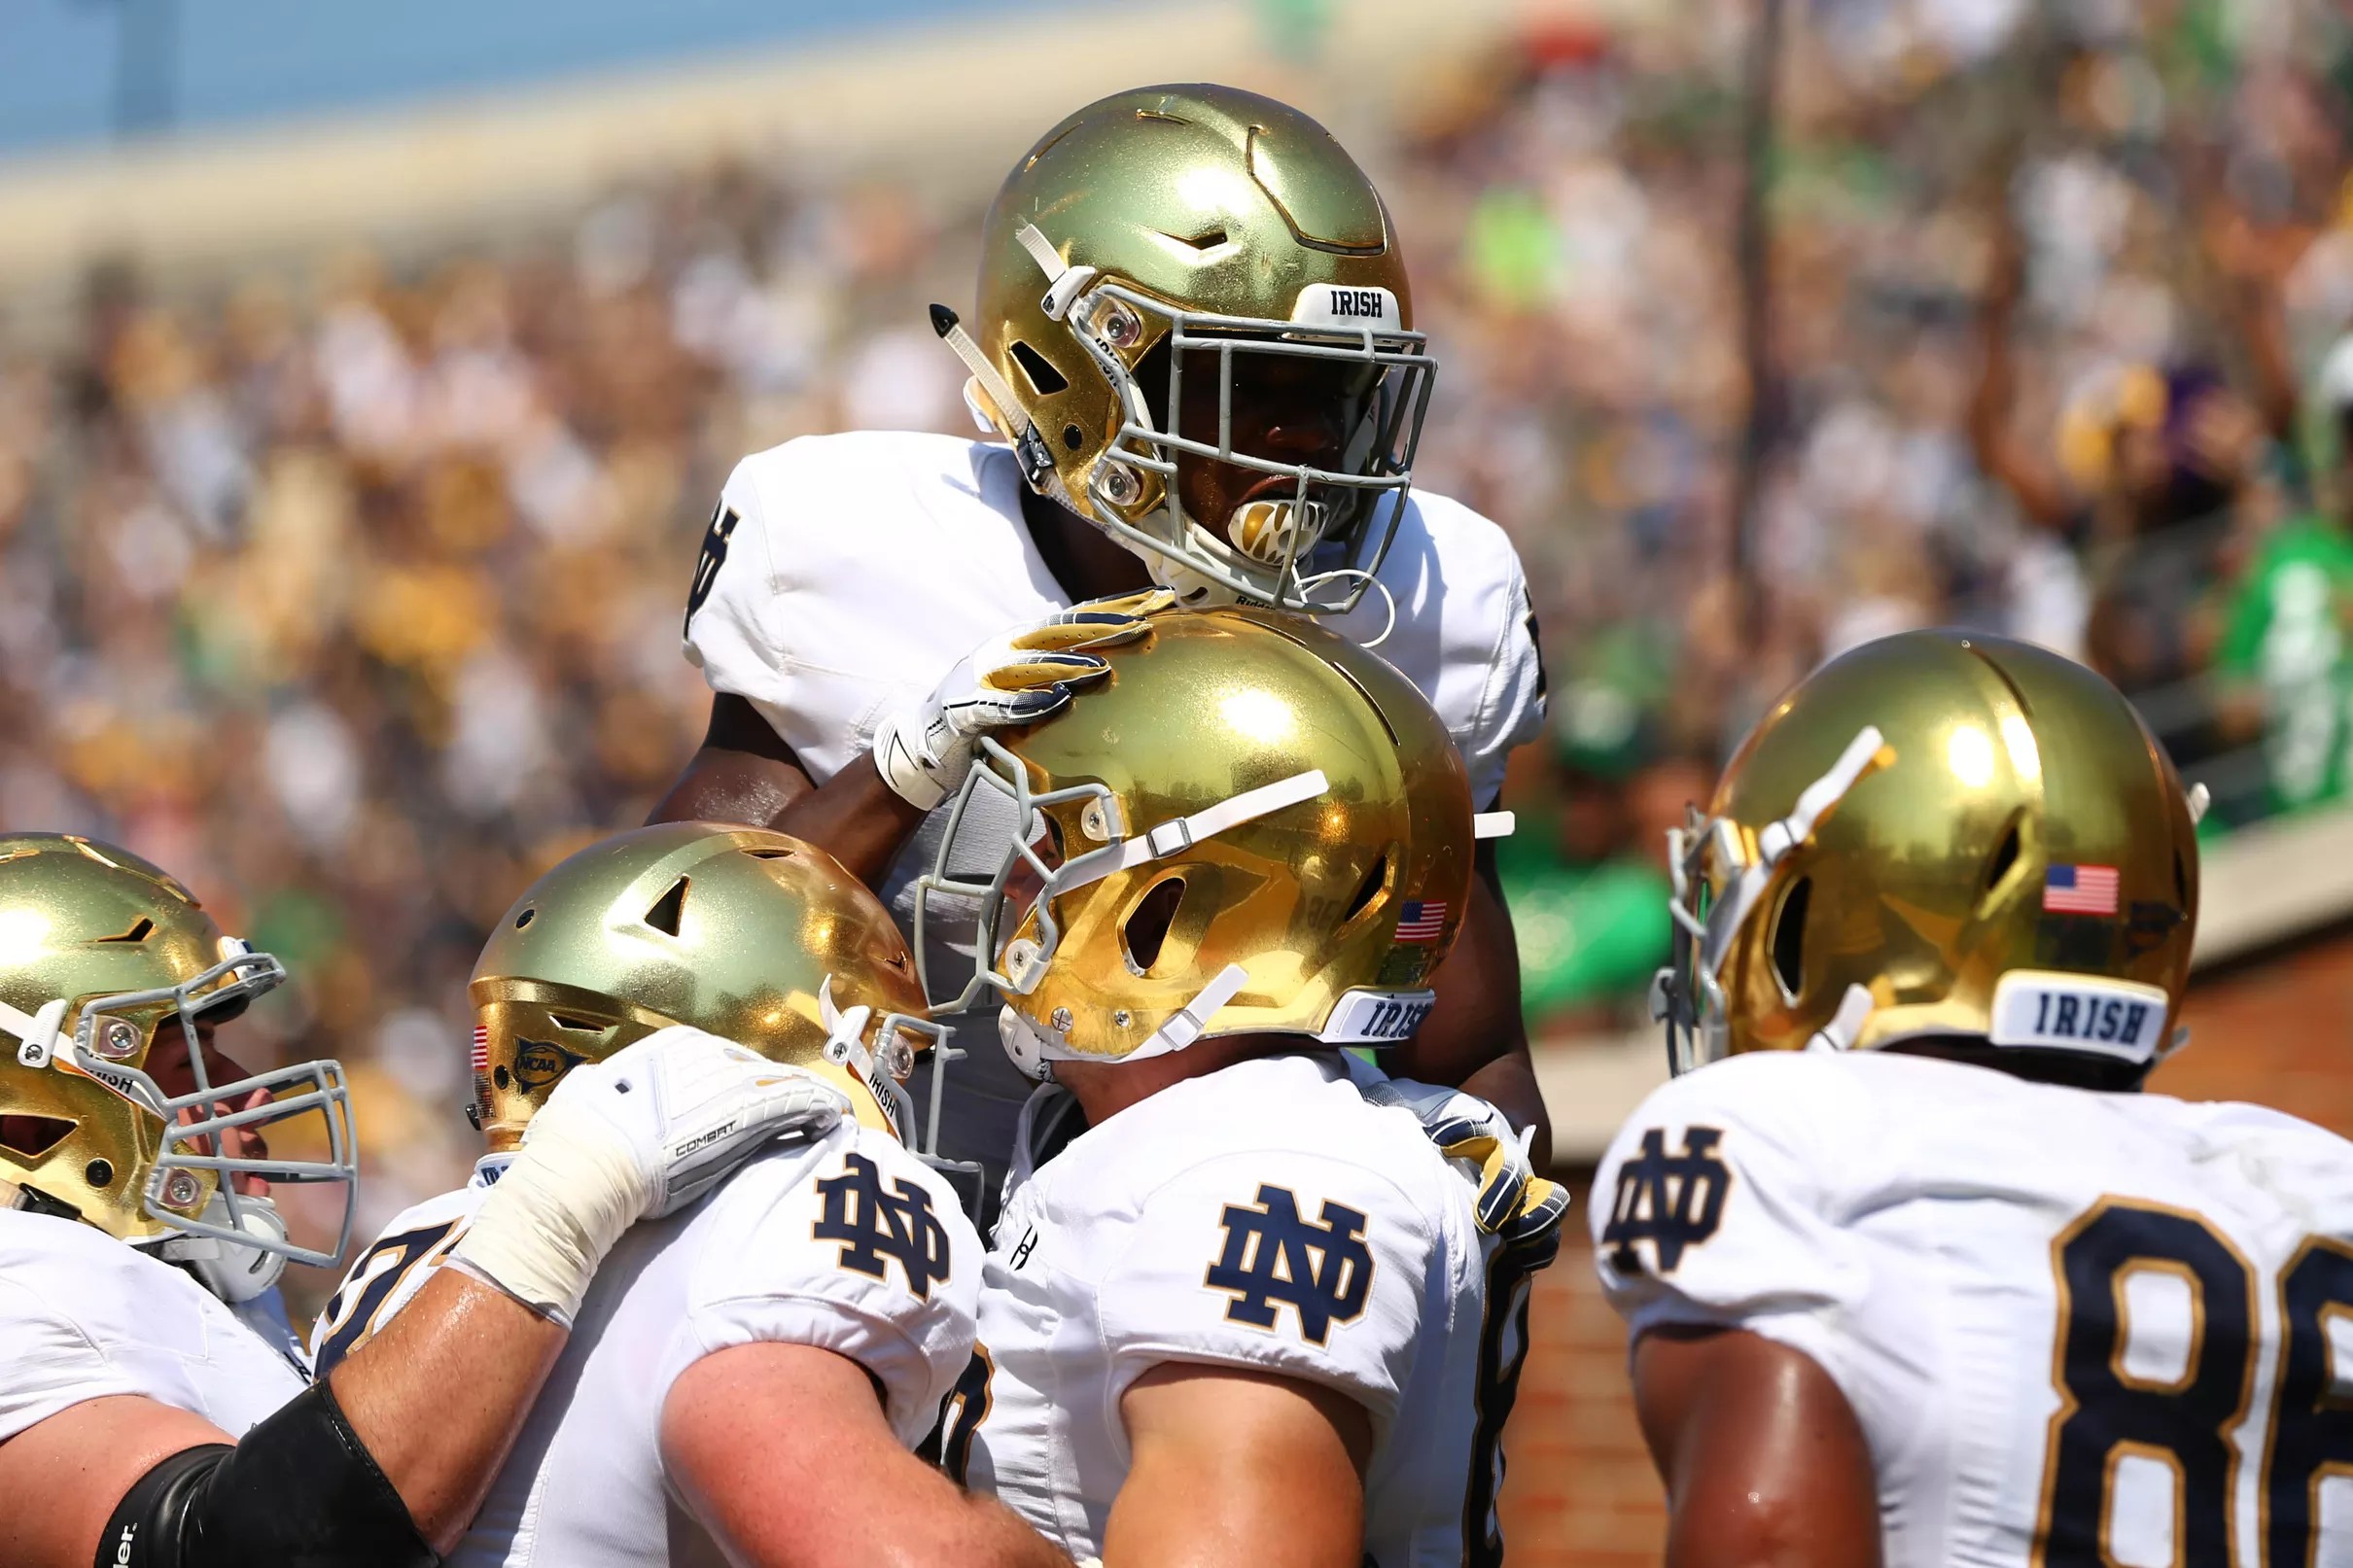 Notre Dame Football Hope Restored With Blowout Win Over Wake Forest